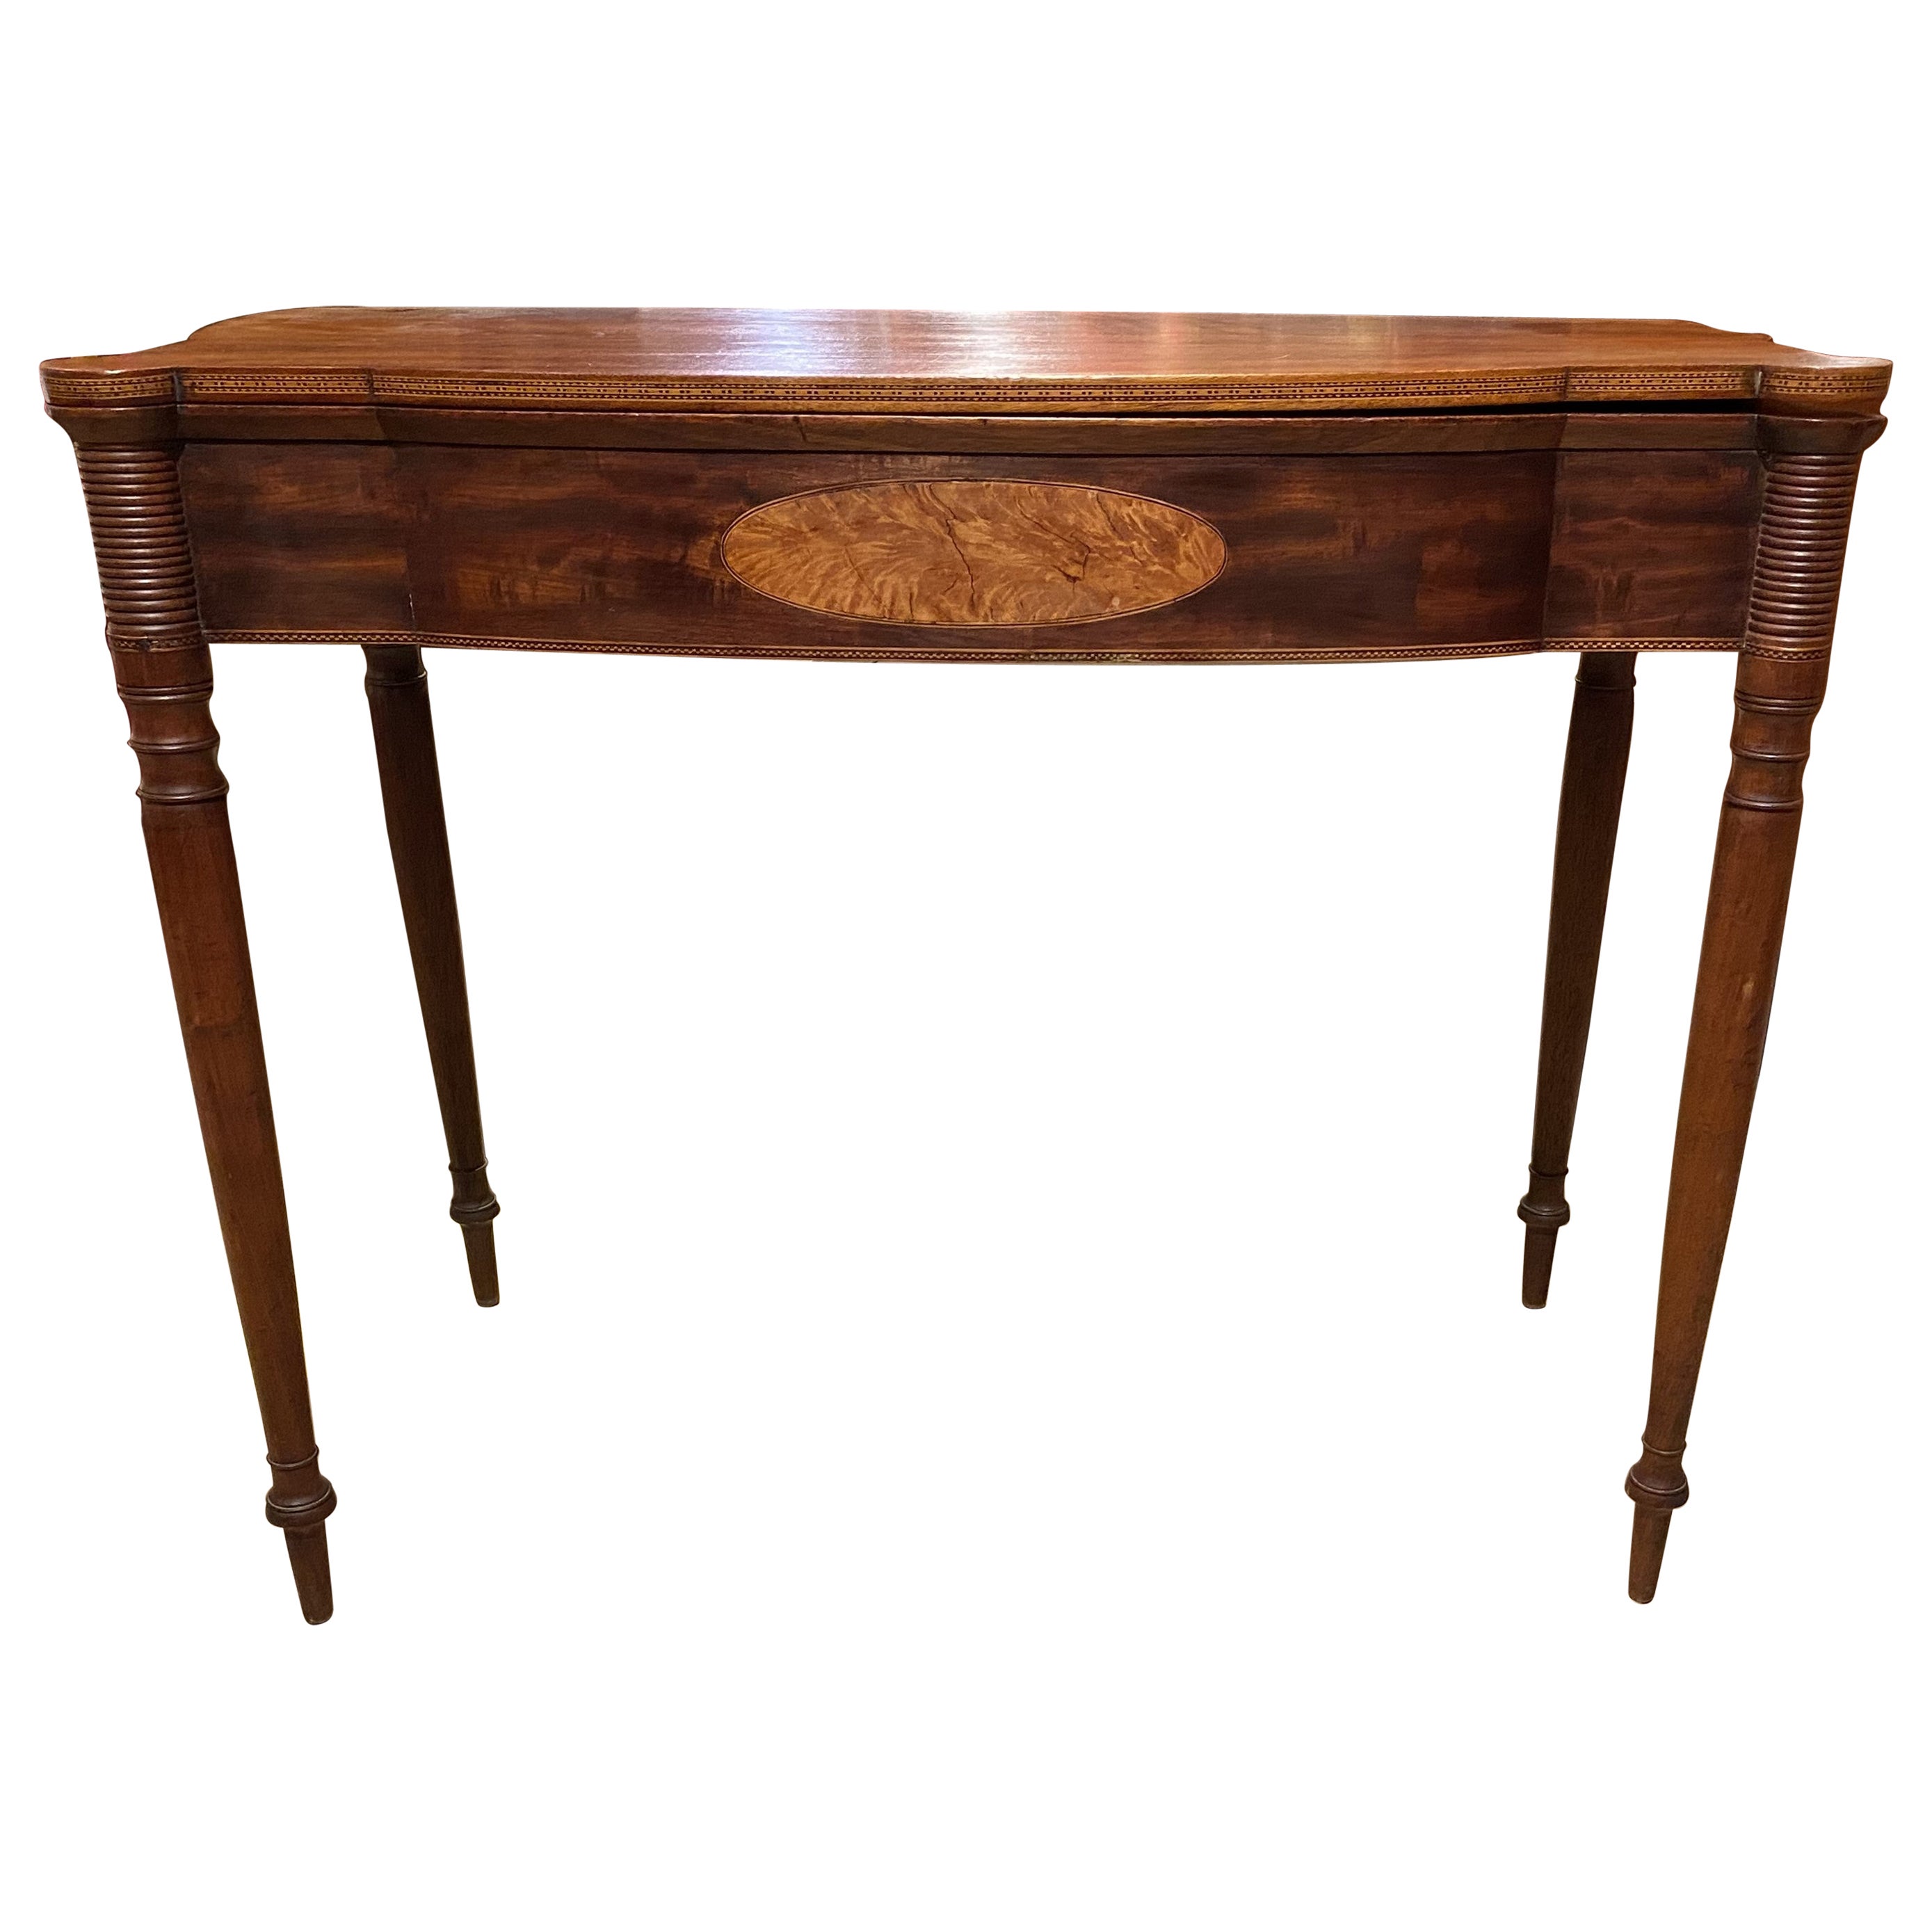 Fine Federal Period Sheraton Mahogany Card or Gaming Table circa 1800 For Sale